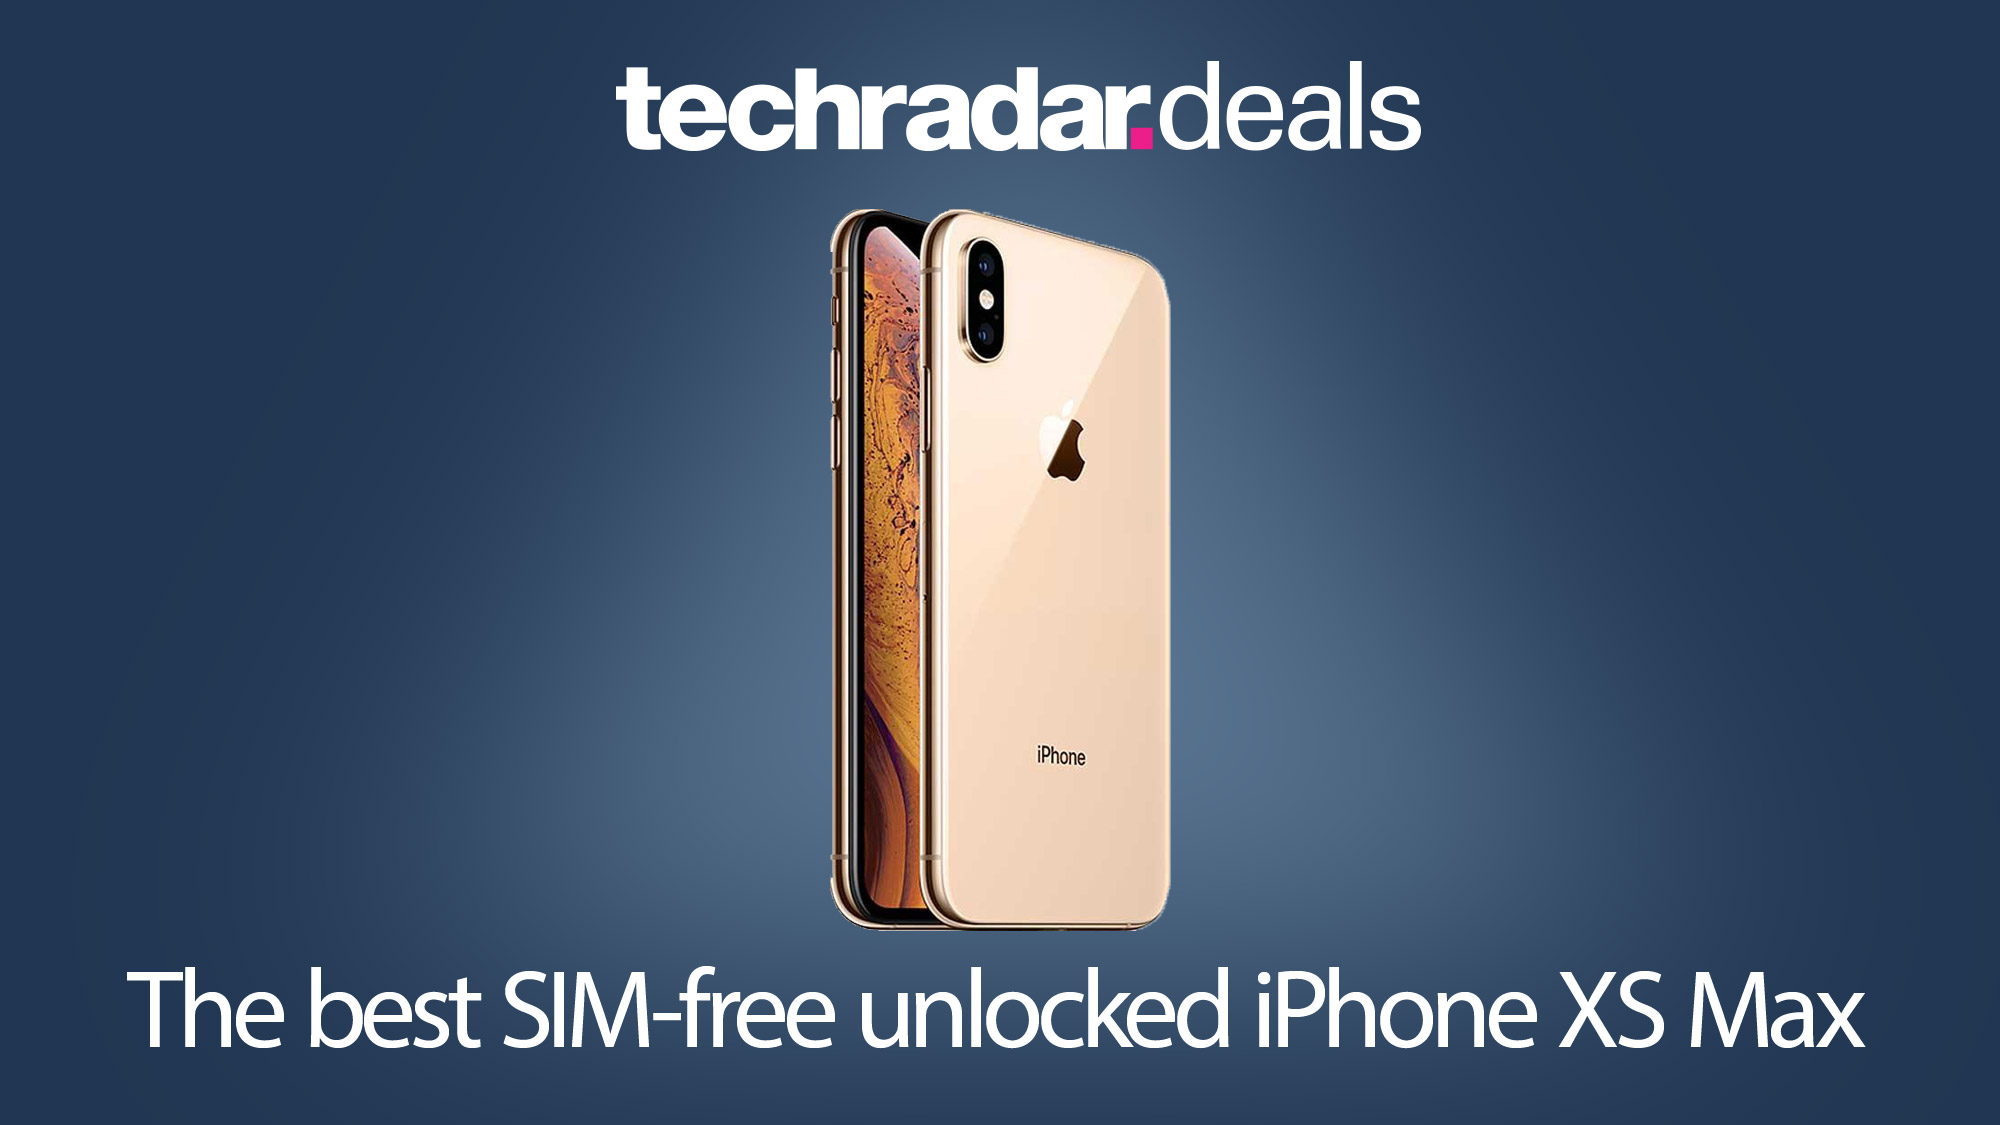 The cheapest iPhone XS Max unlocked SIM-free prices in December 